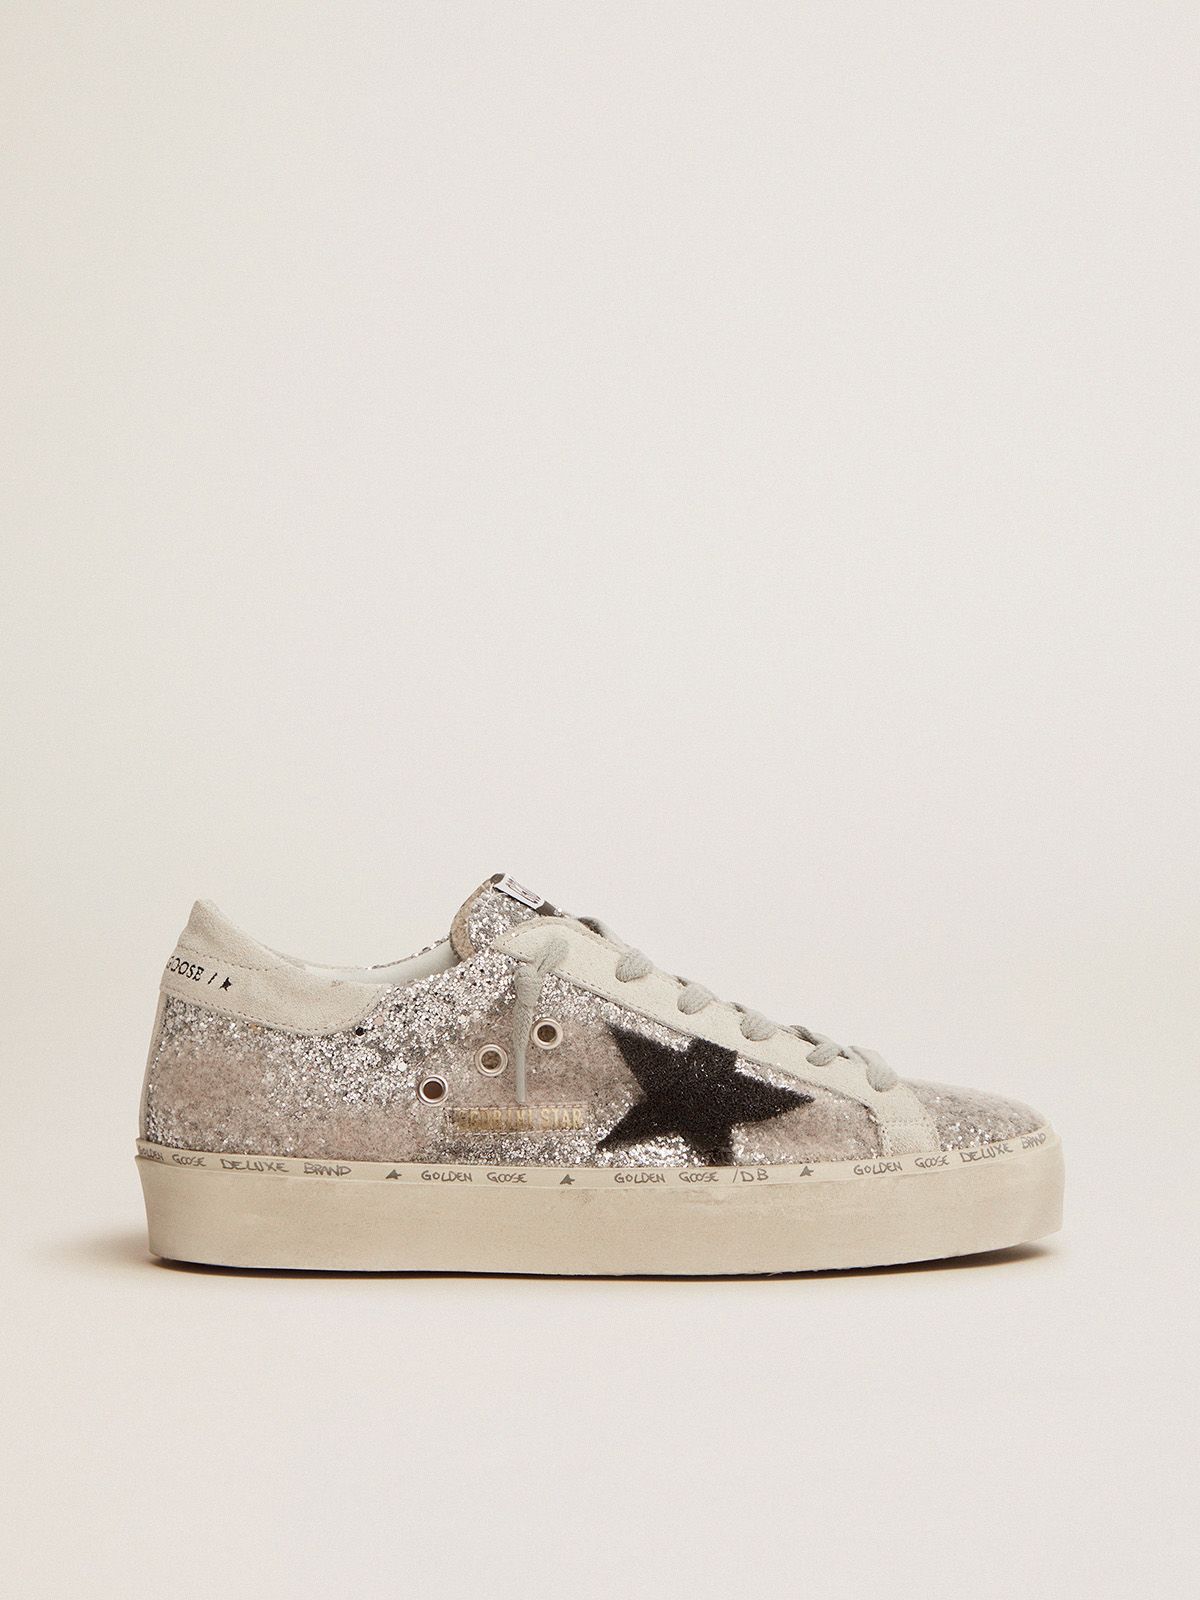 golden goose and glitter silver Hi Star with embroidery sneakers wool in star chenille